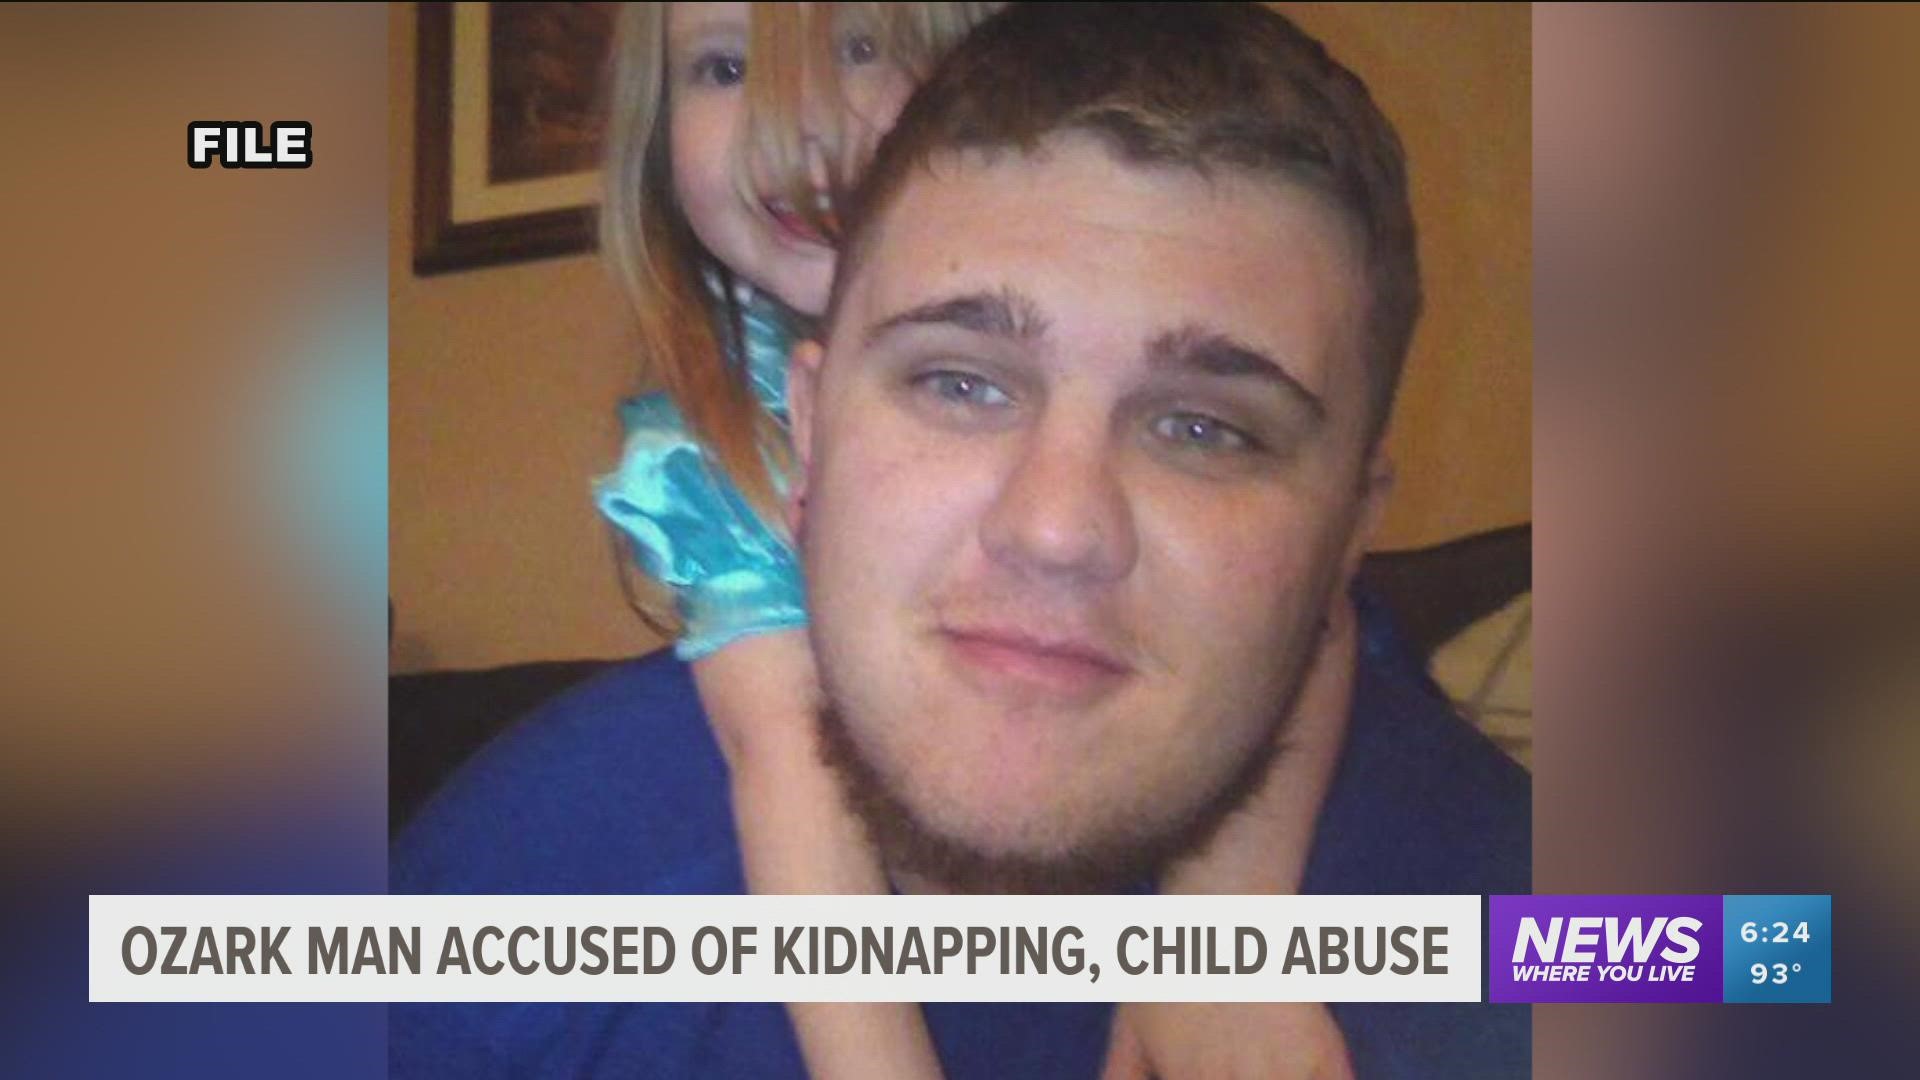 The family of the man accused of assaulting and attempting to drown a 9-year-old boy has spoken out against the Franklin County Sheriff's Office.